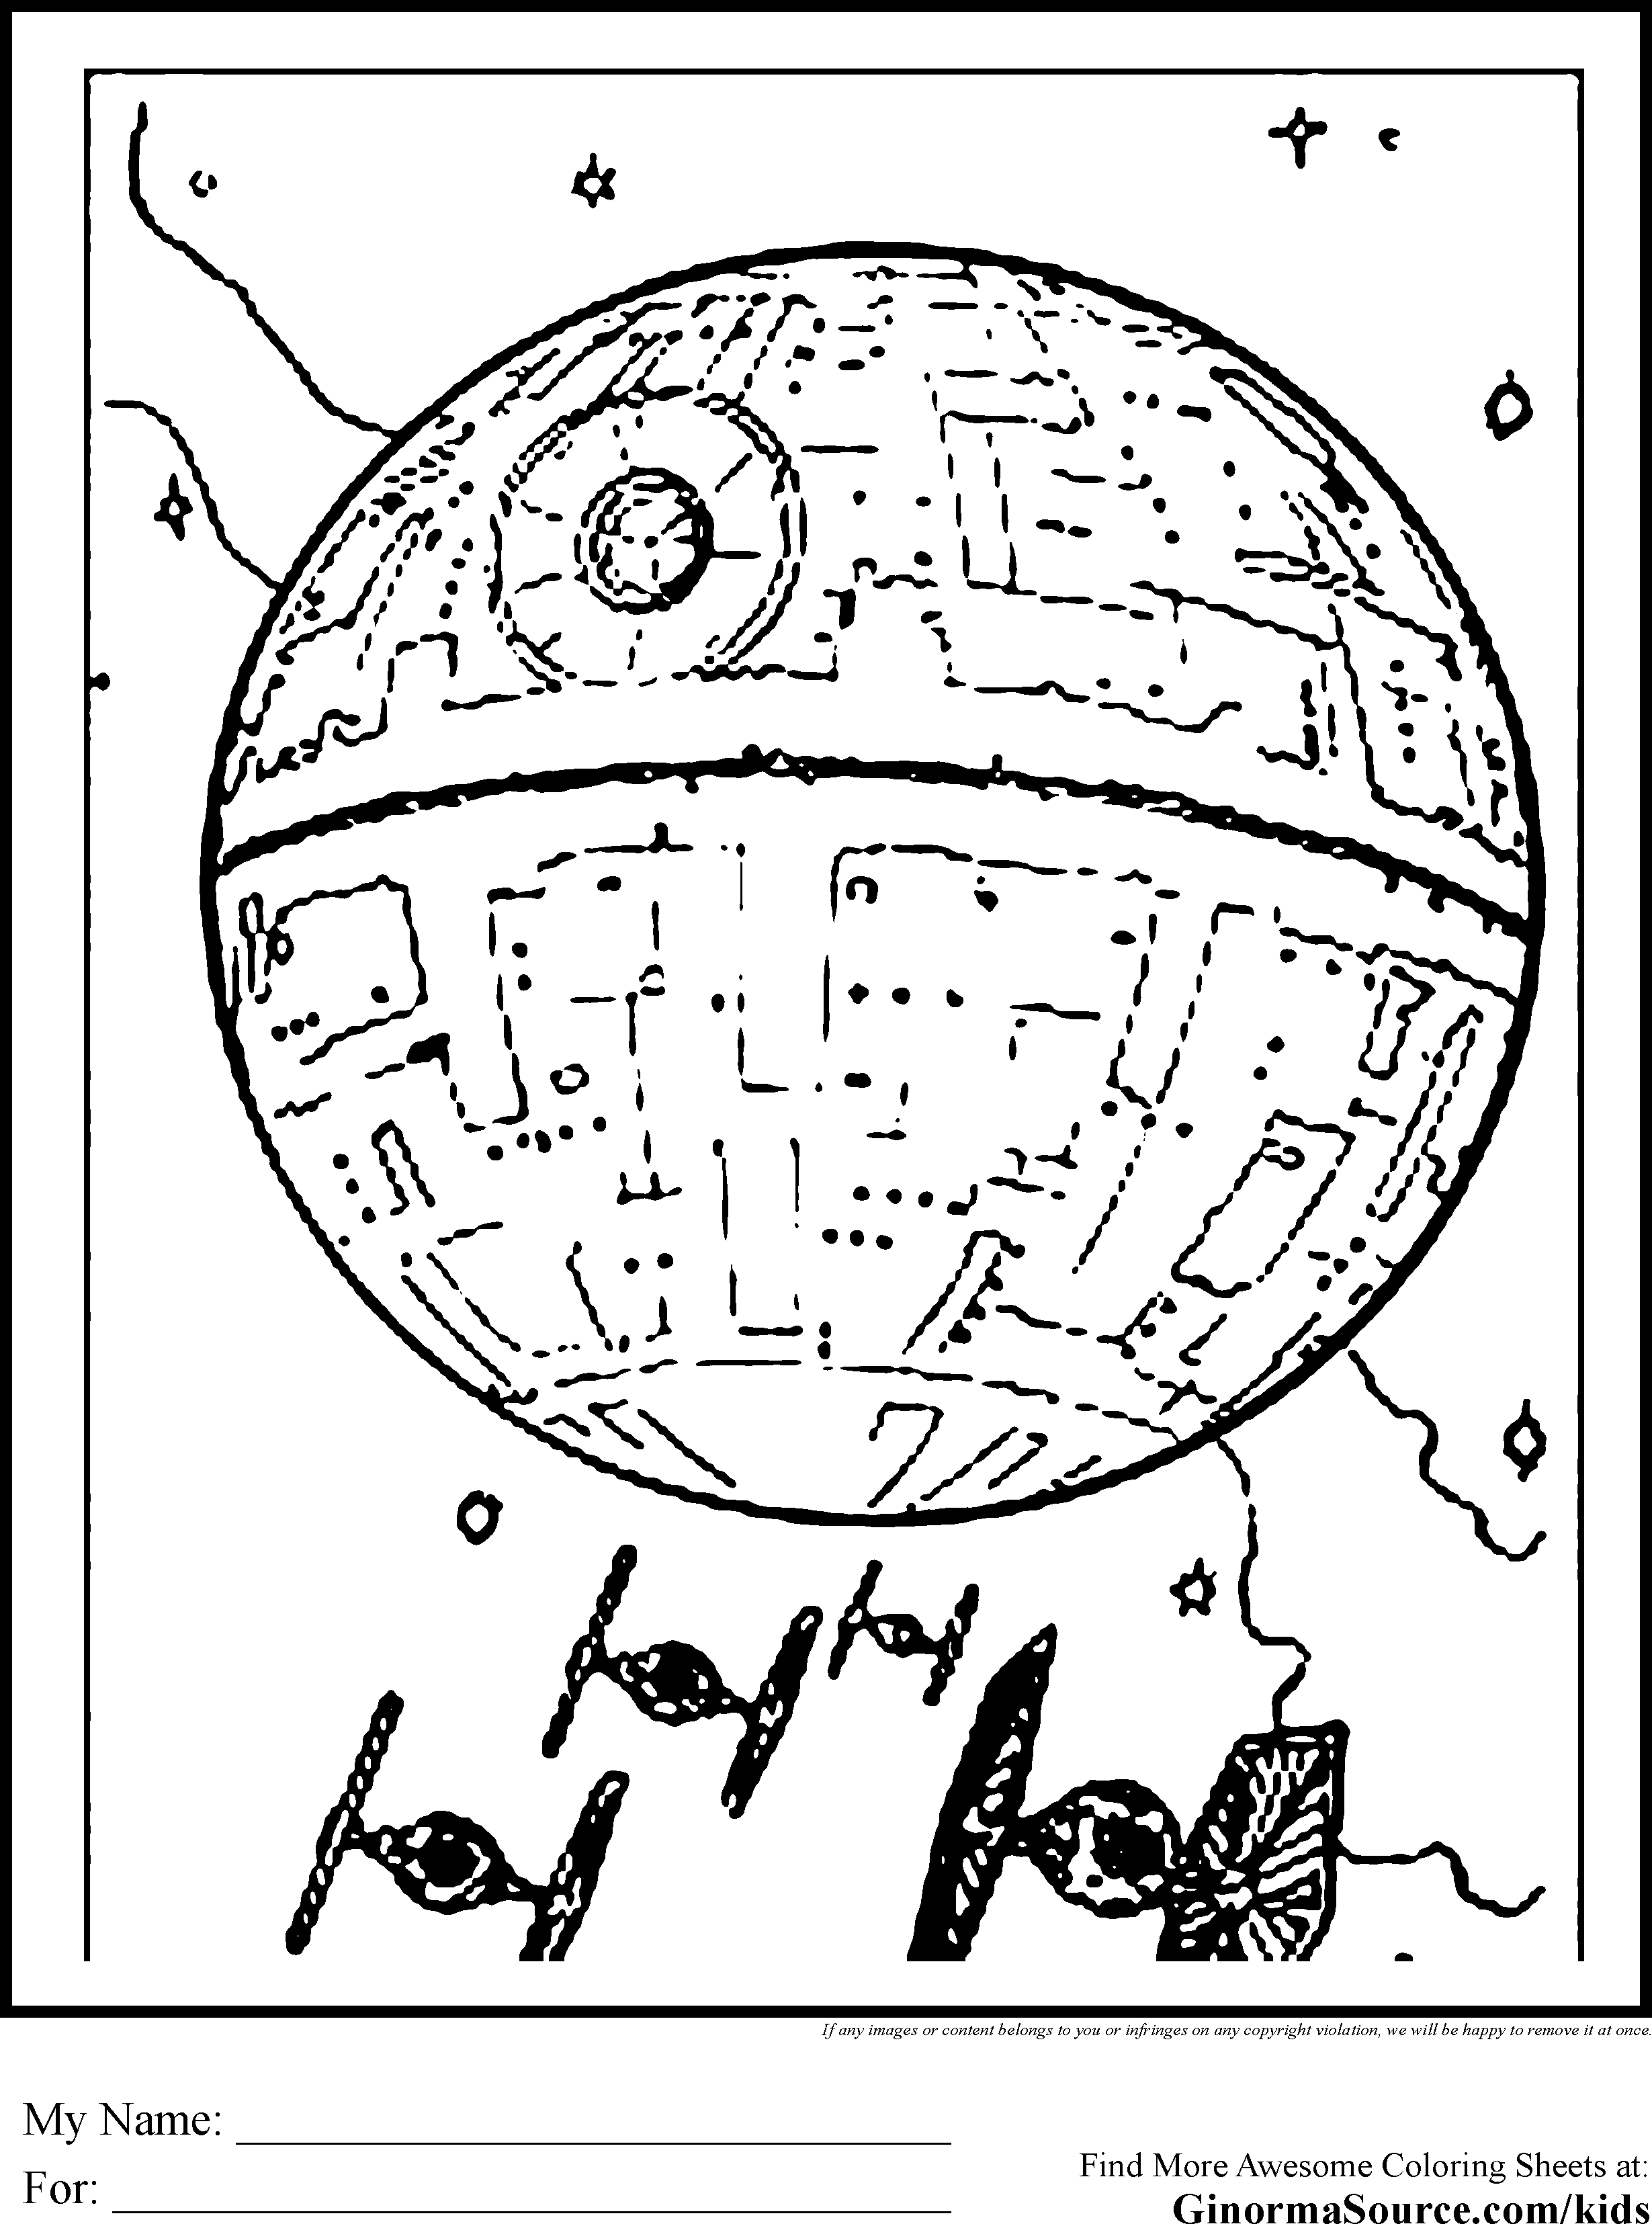 Ideas For Death Star Coloring Pages | Sugar And Spice